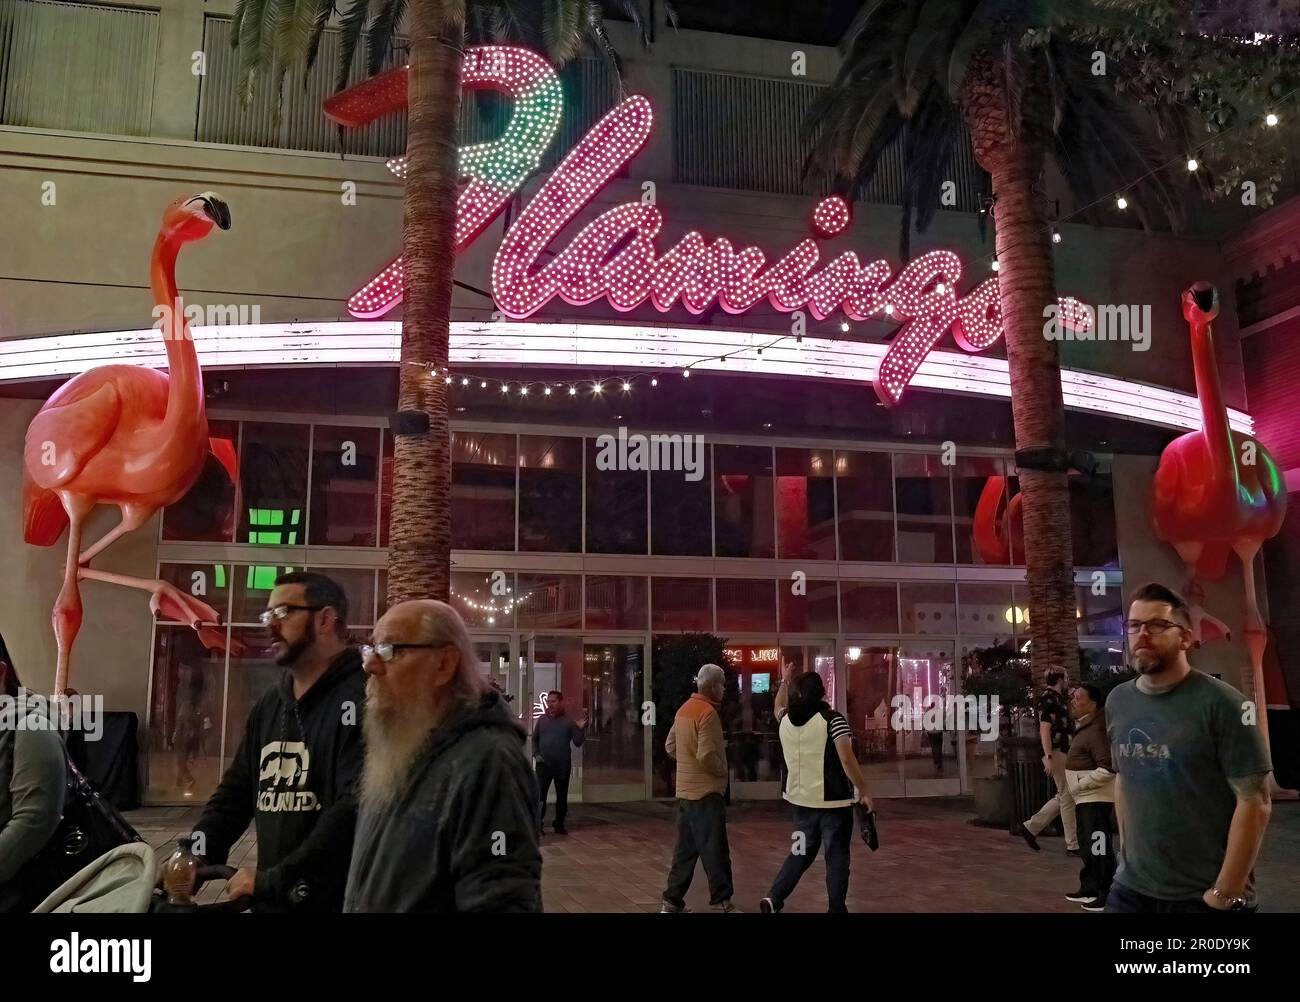 The Flamingo Las Vegas Hotel and Casino at night with people outside on the street; in Las Vegas, Nevada USA. Stock Photo